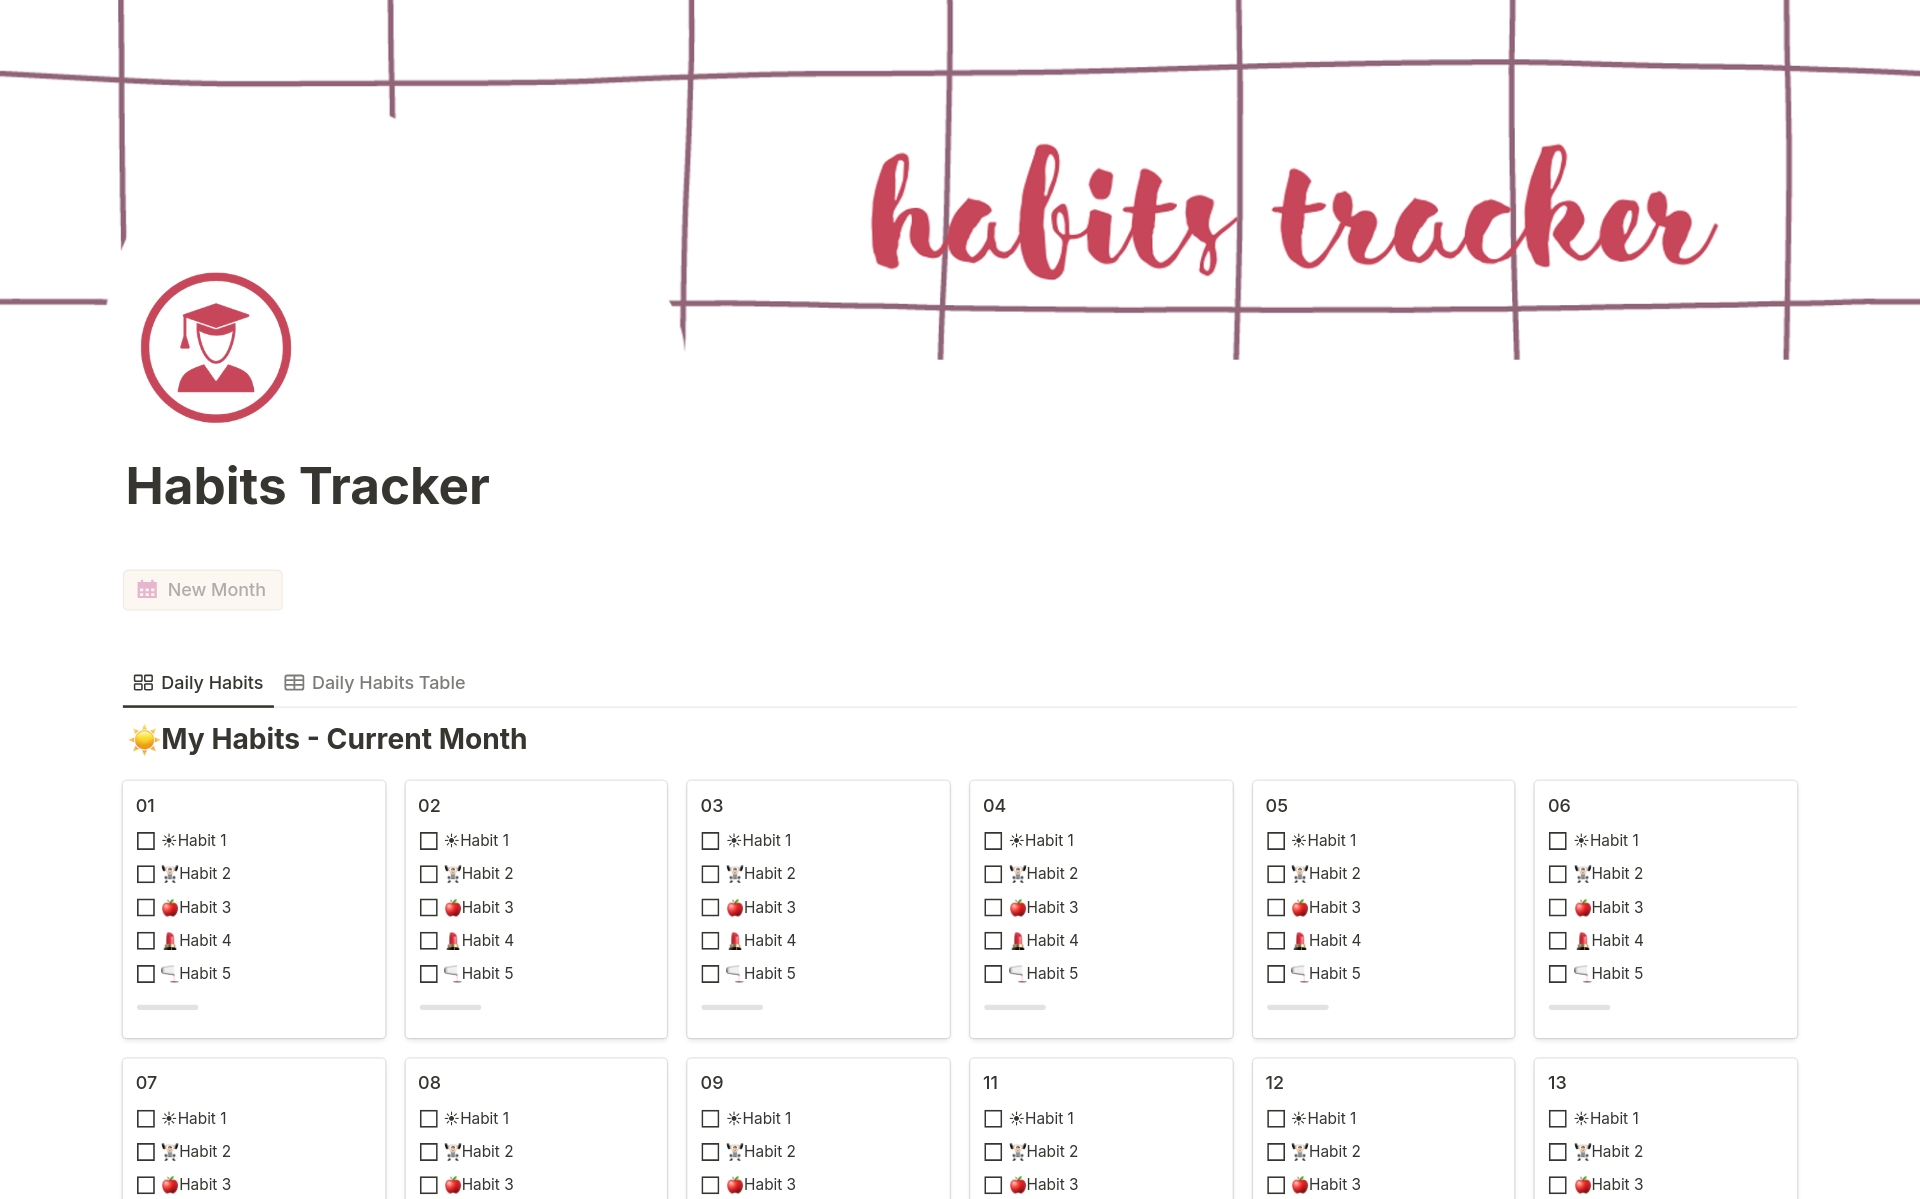 A template preview for Habits tracker